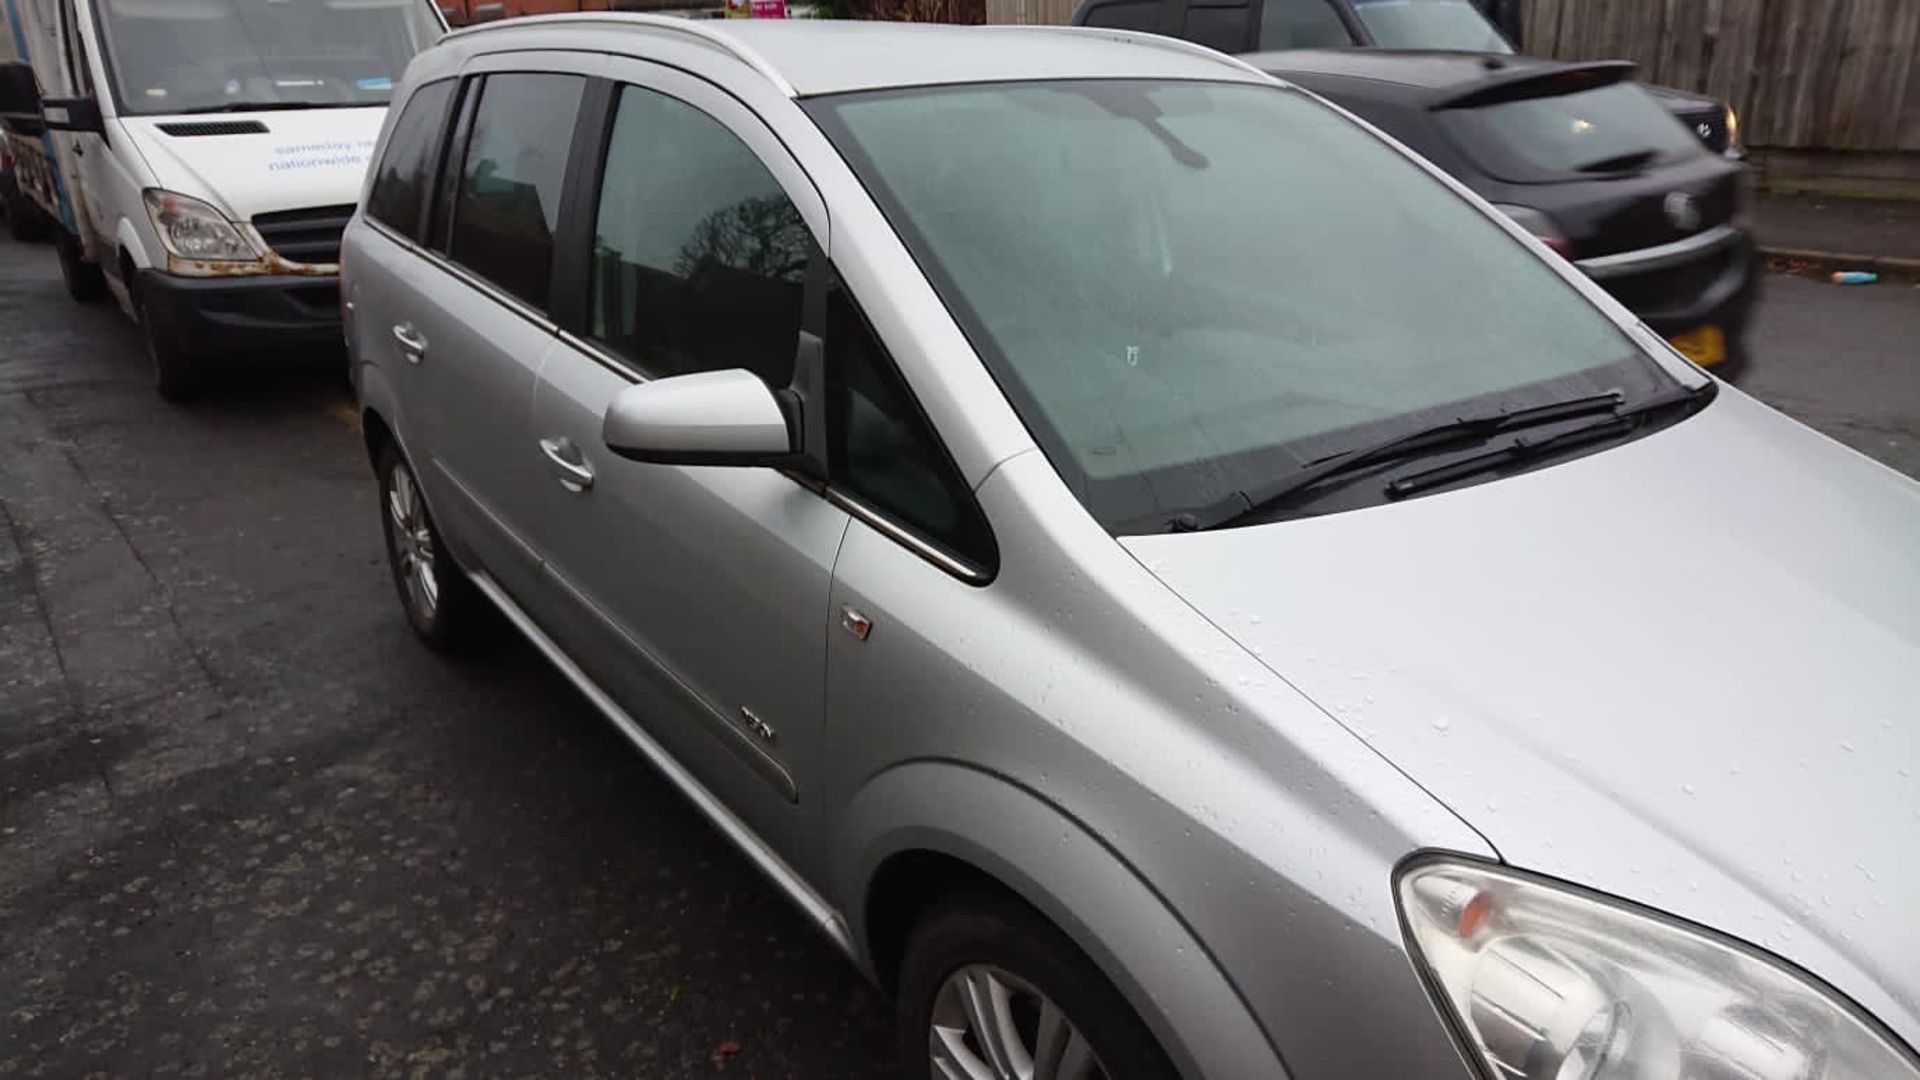 VAUXHALL ZAFIRA MKO8 MZV 1.9 CDTI COLLECTION LEICESTER - Image 3 of 10